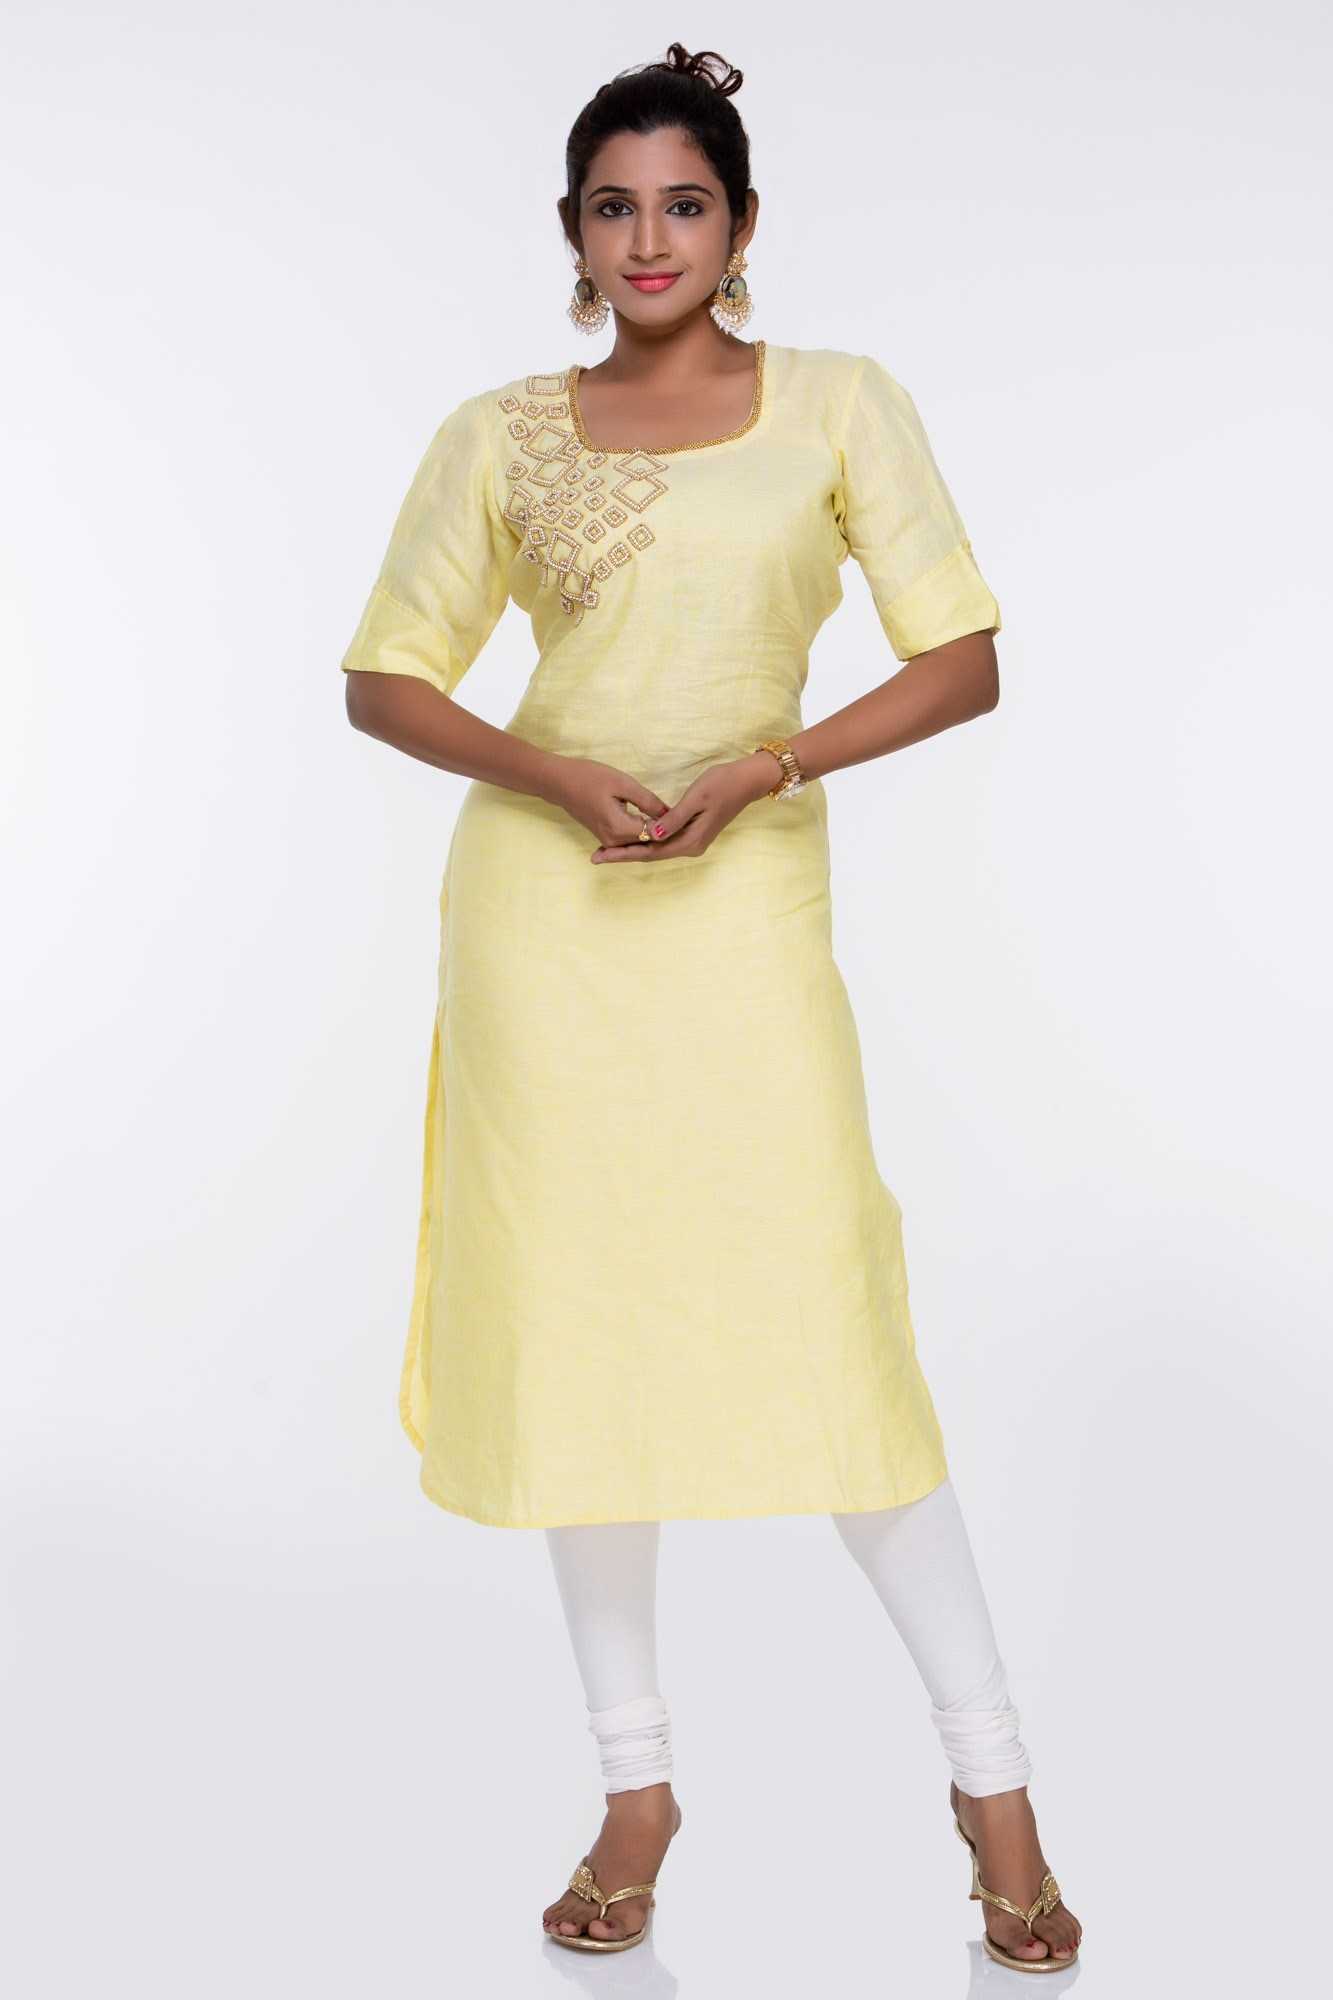 Indo Era White & Yellow Cotton Printed Kurta Palazzo Set With Dupatta Price  in India, Full Specifications & Offers | DTashion.com